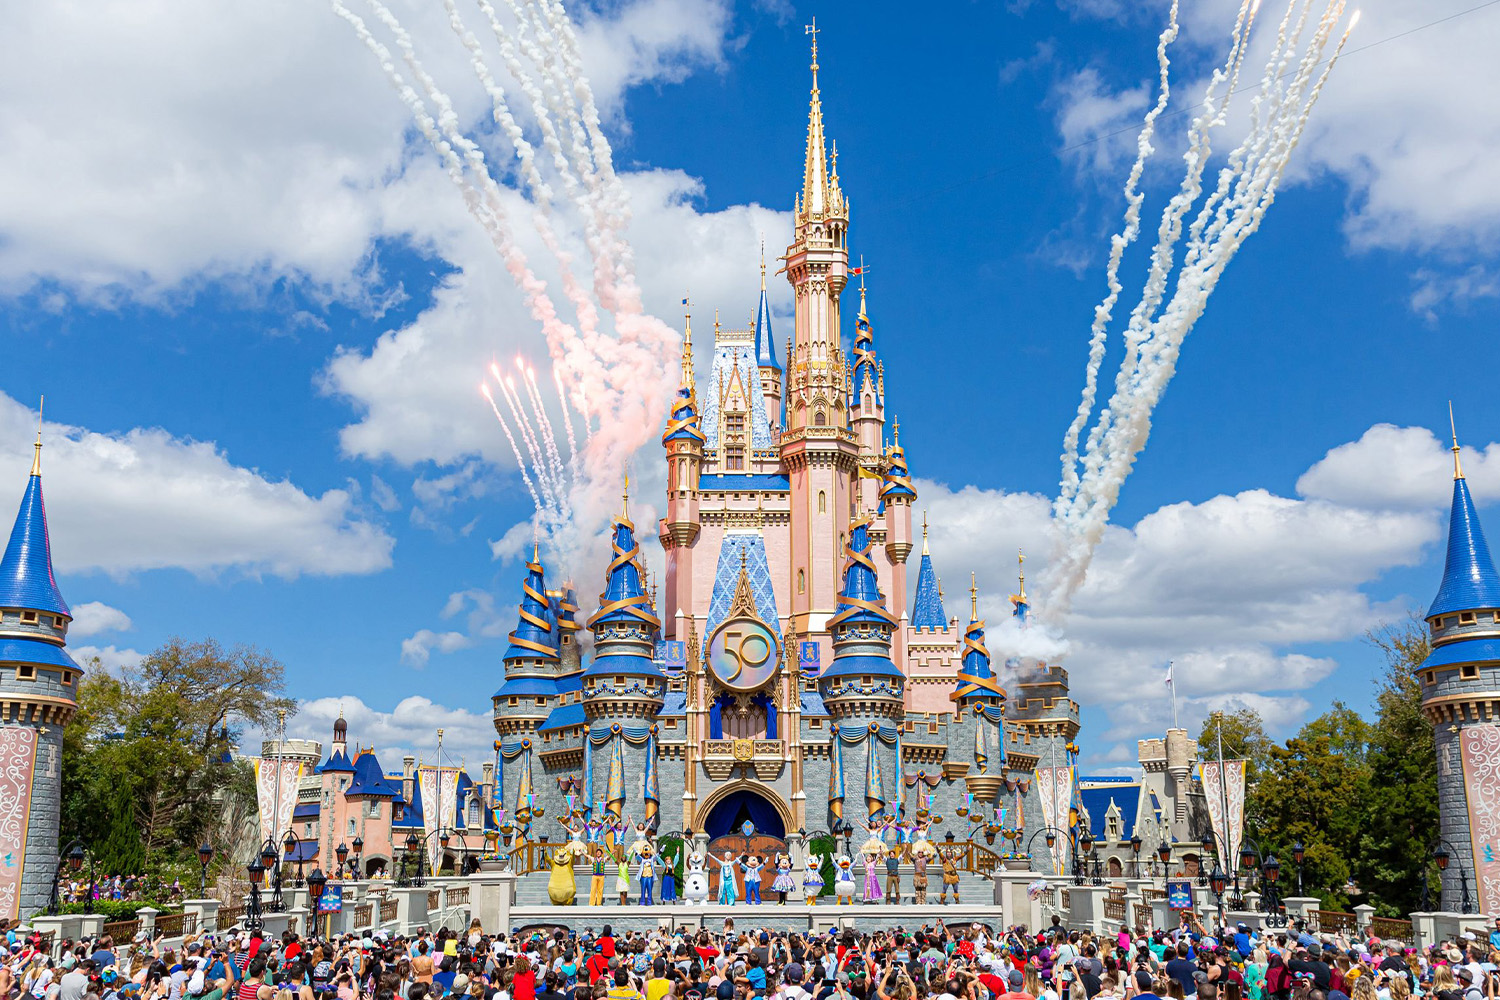 7 Simple Rules for Surviving the Family Disney Trip - InsideHook